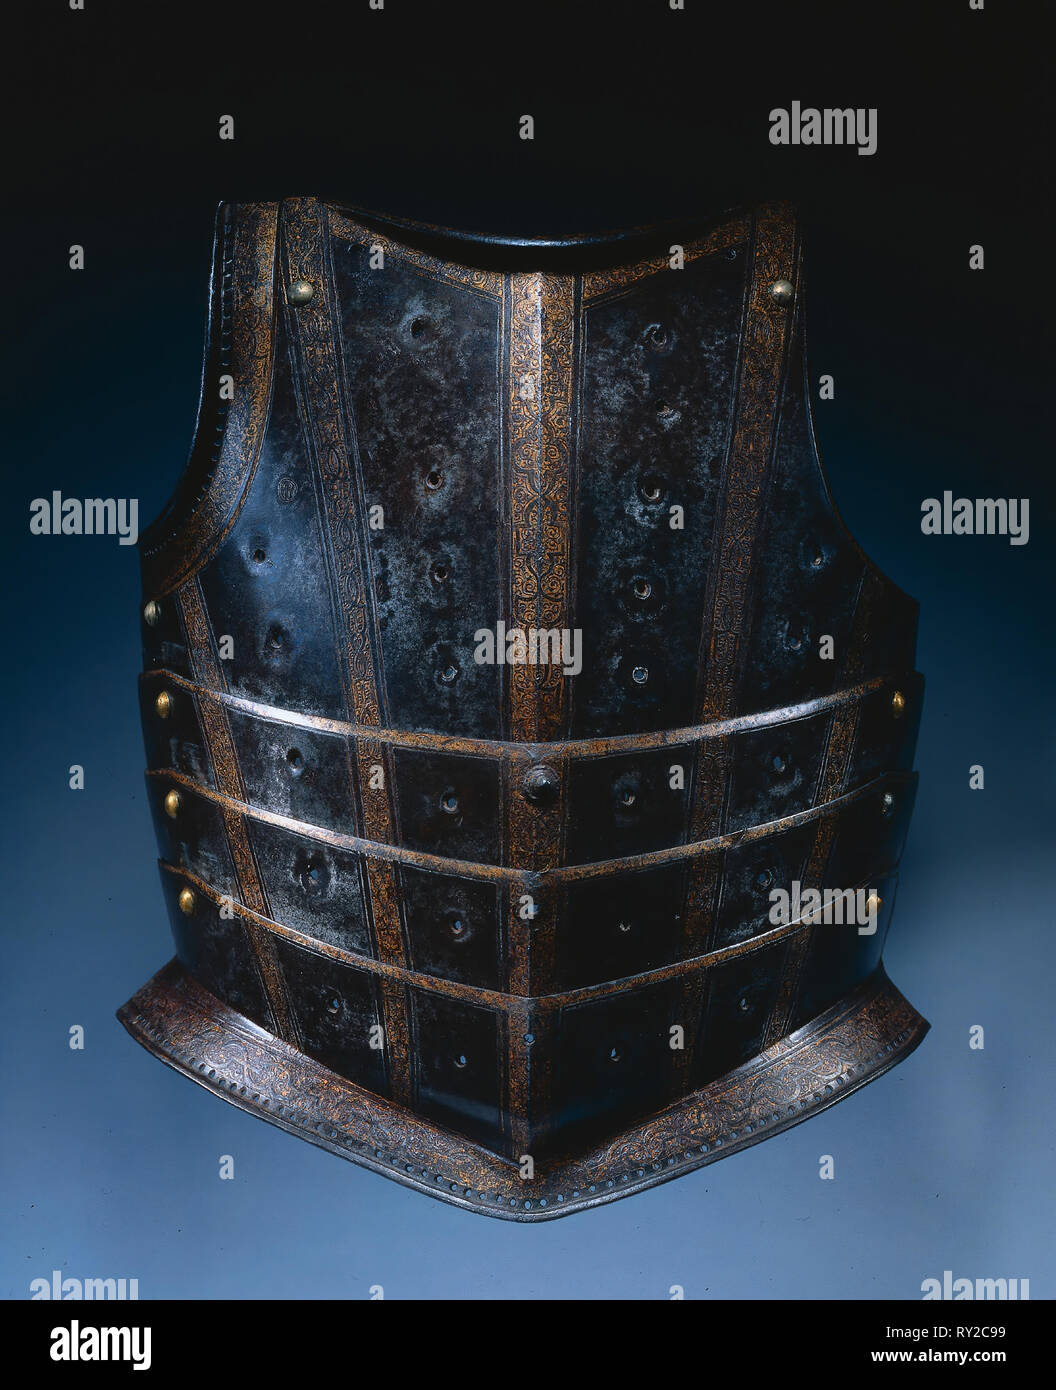 Breastplate from Hussar's Cuirass, c. 1580. Germany, Augsburg or Hungary, 16th century. Steel (originally blued, now russet), etched and gilded strapwork bands; ; overall: 42.3 x 35 cm (16 5/8 x 13 3/4 in Stock Photo